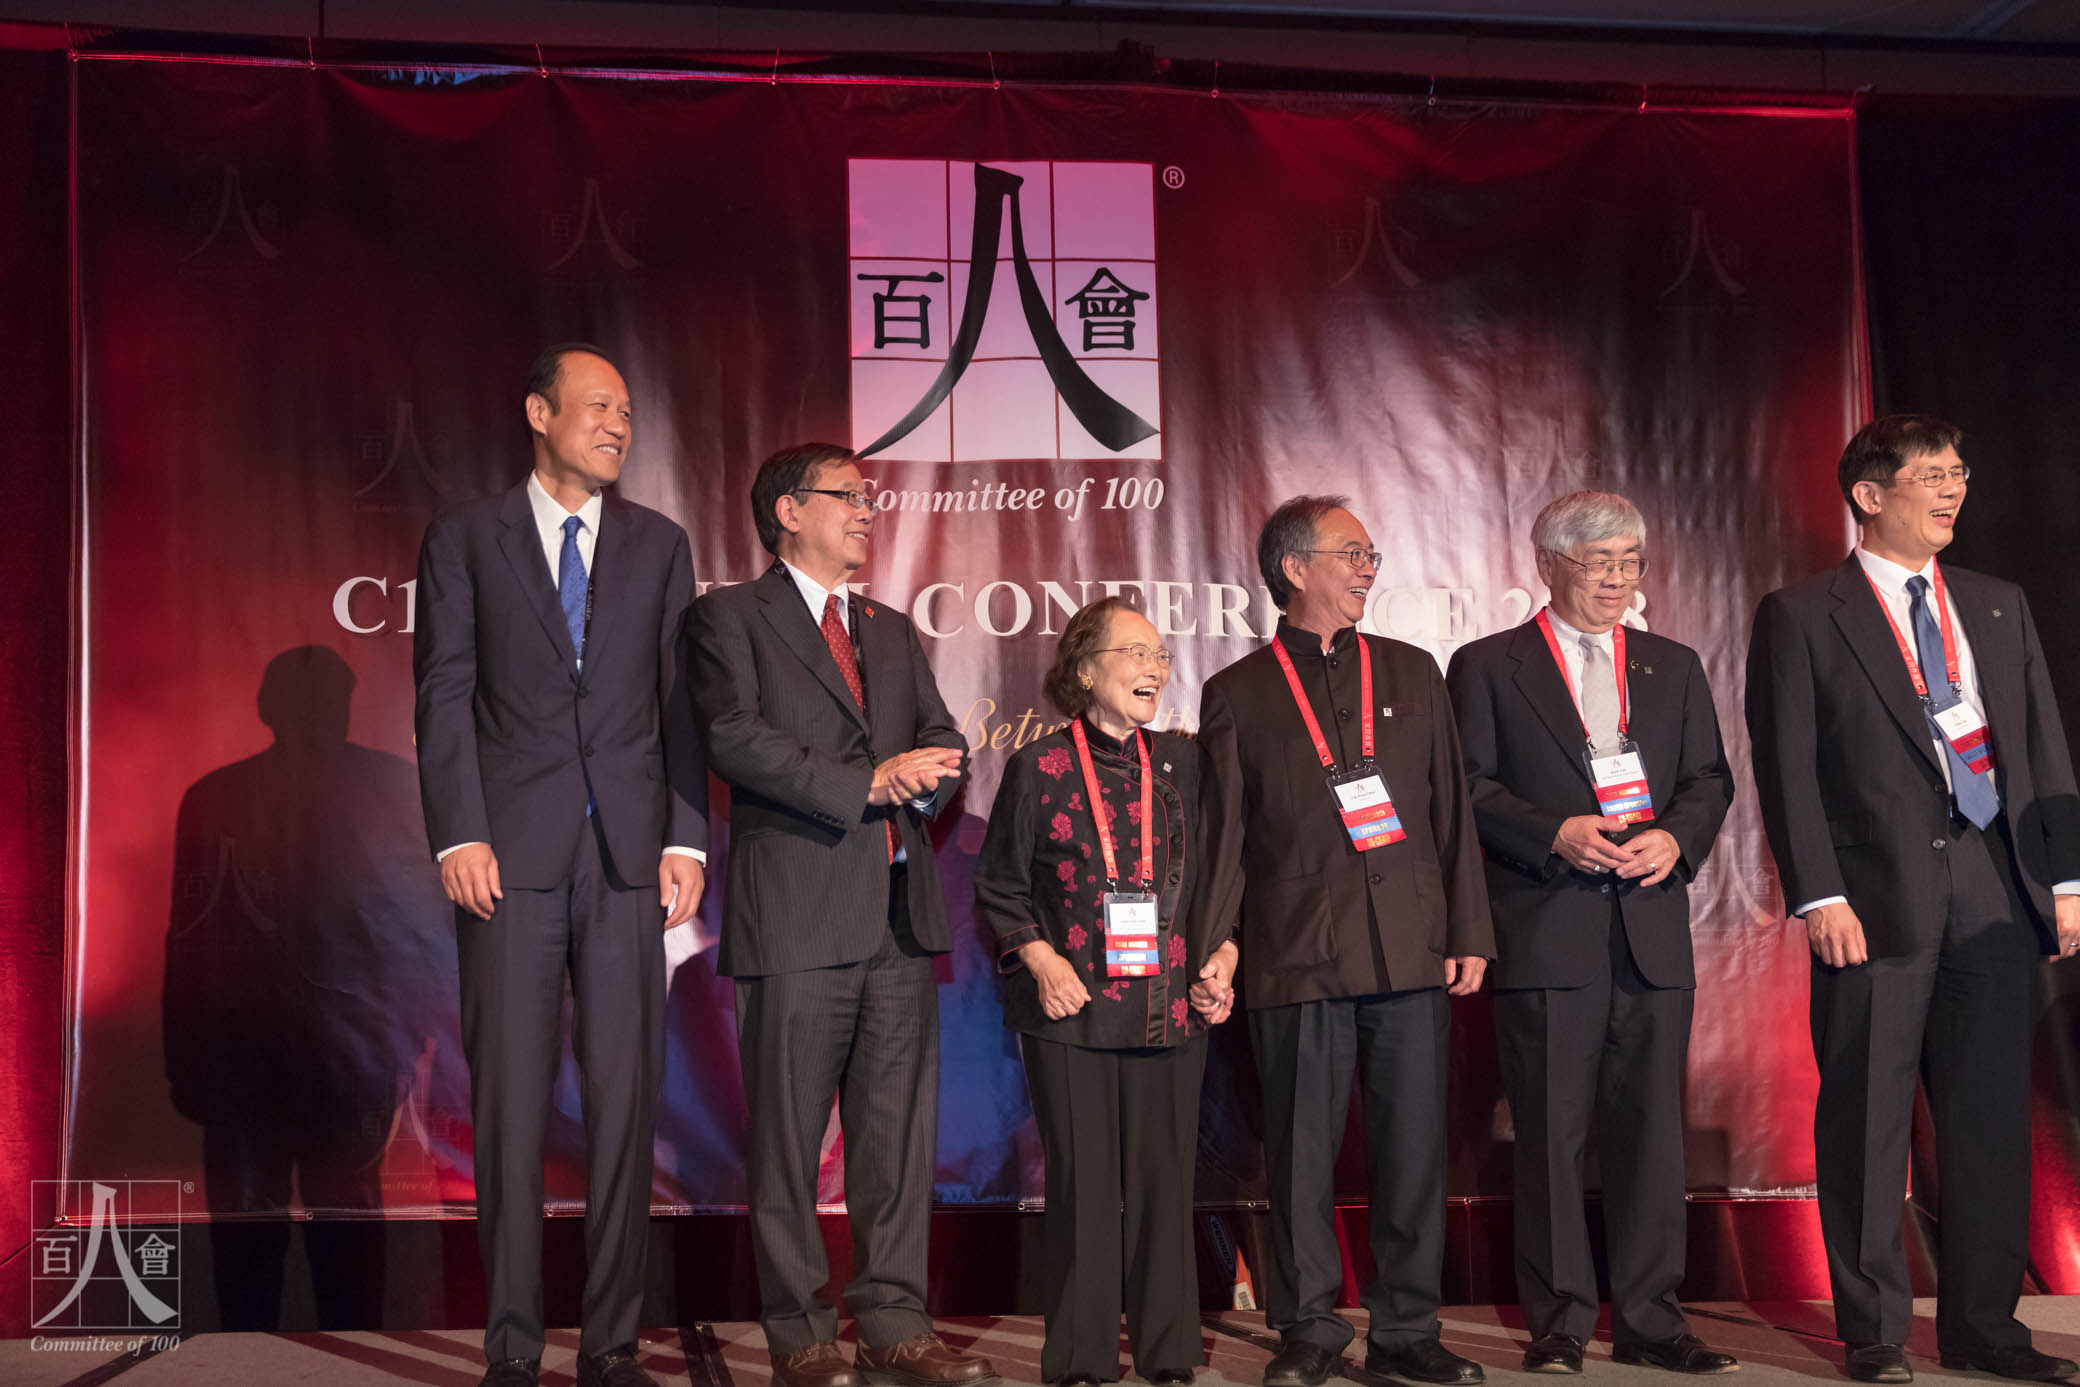 Committee of 100 held its 2018 Annual Conference in Silicon Valley 美国百人会在硅谷举行2018年年会